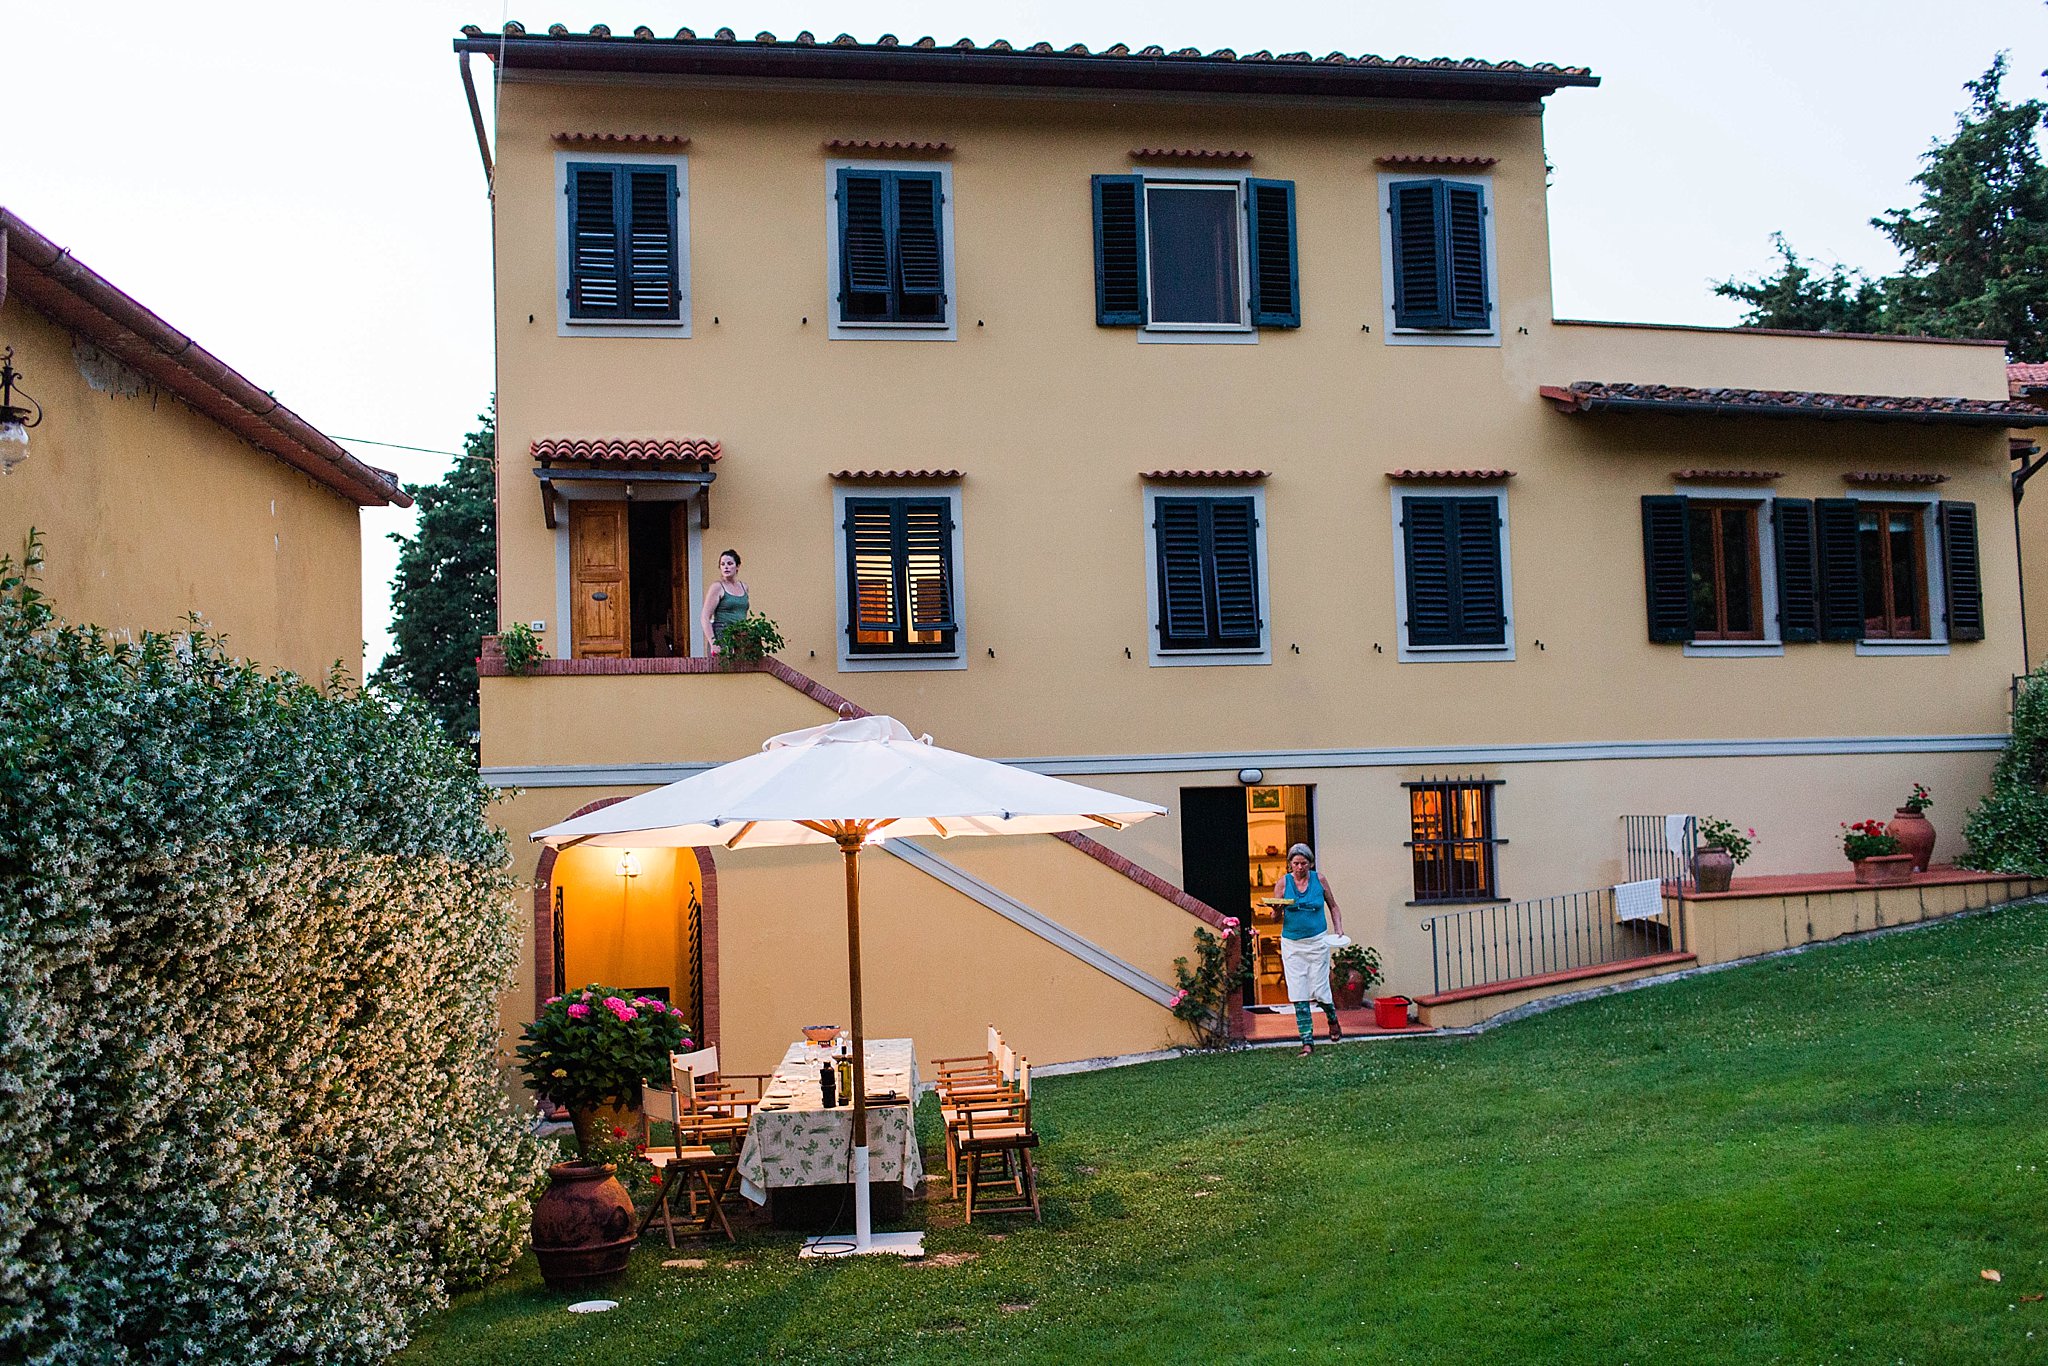 kristen_dyer_photography_italy_homeaway (11 of 28).jpg